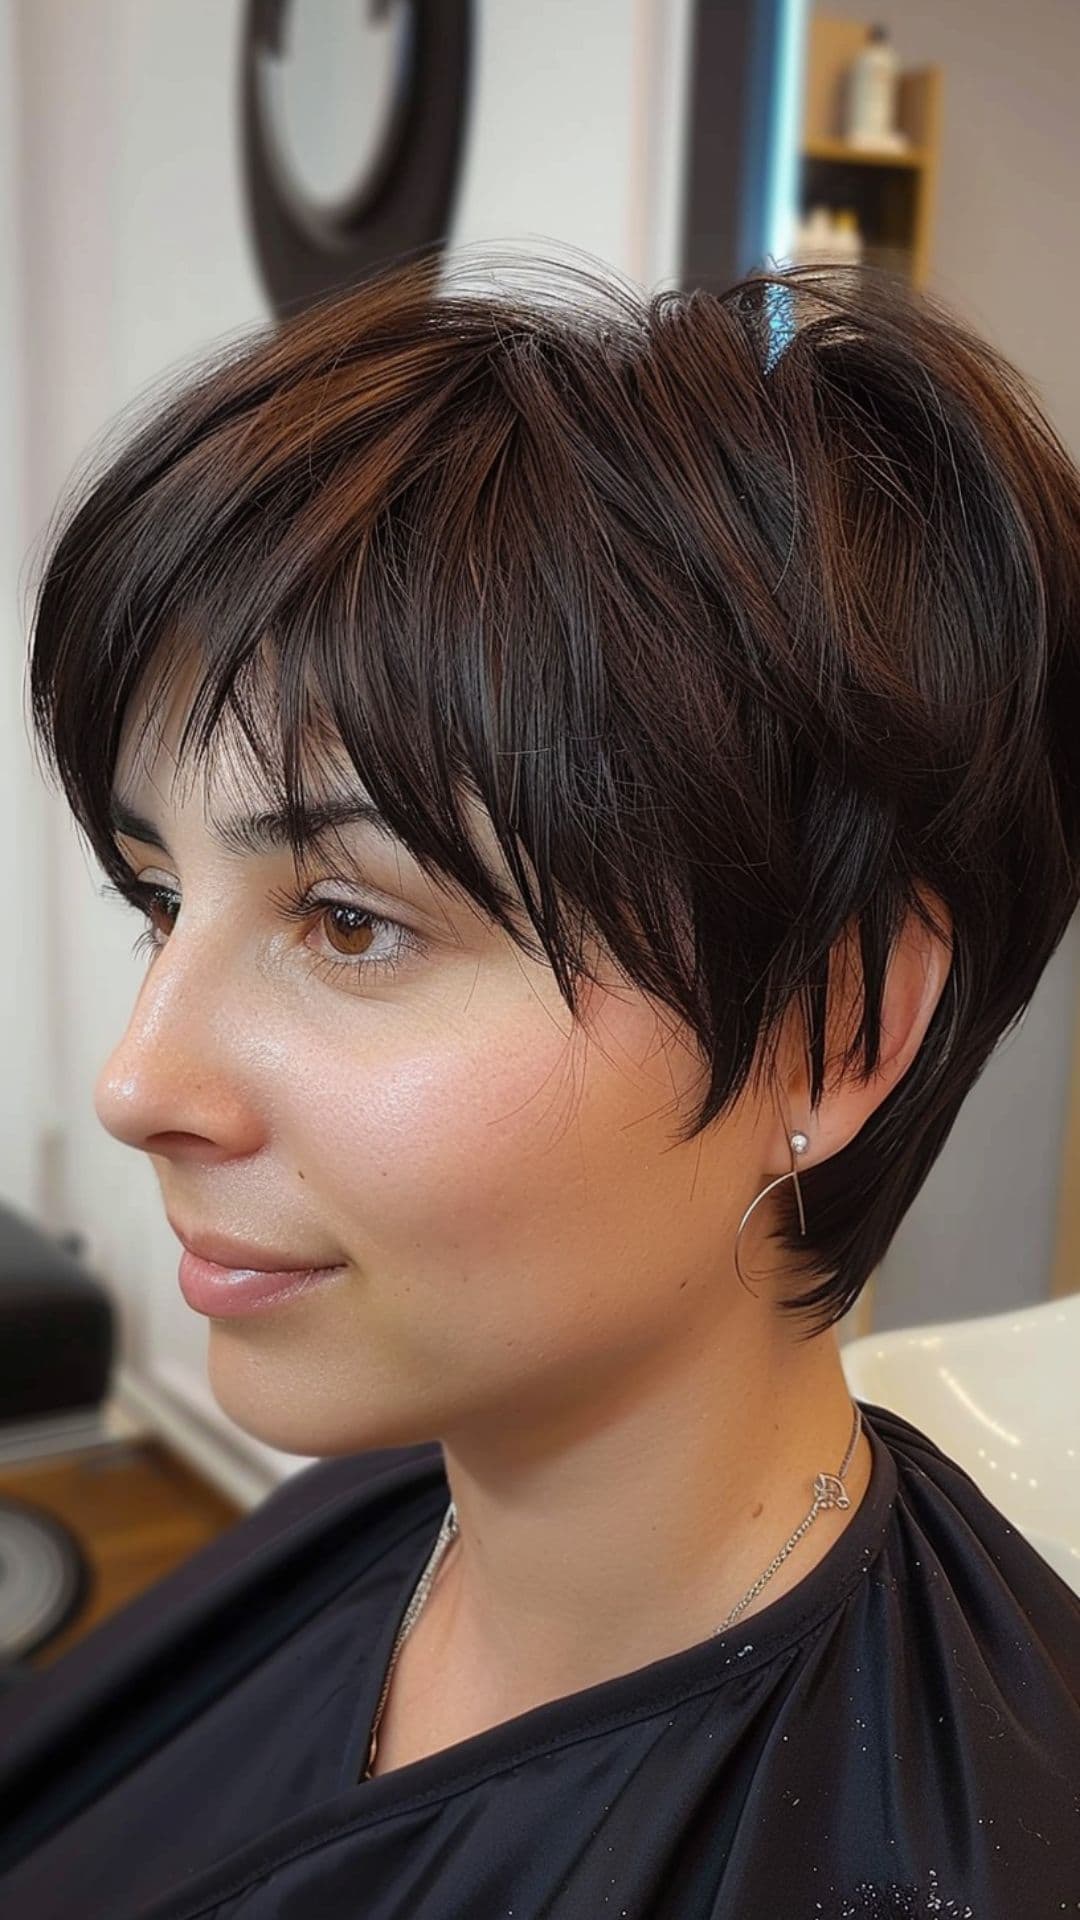 A woman modelling a pixie cut with face-framing layers.